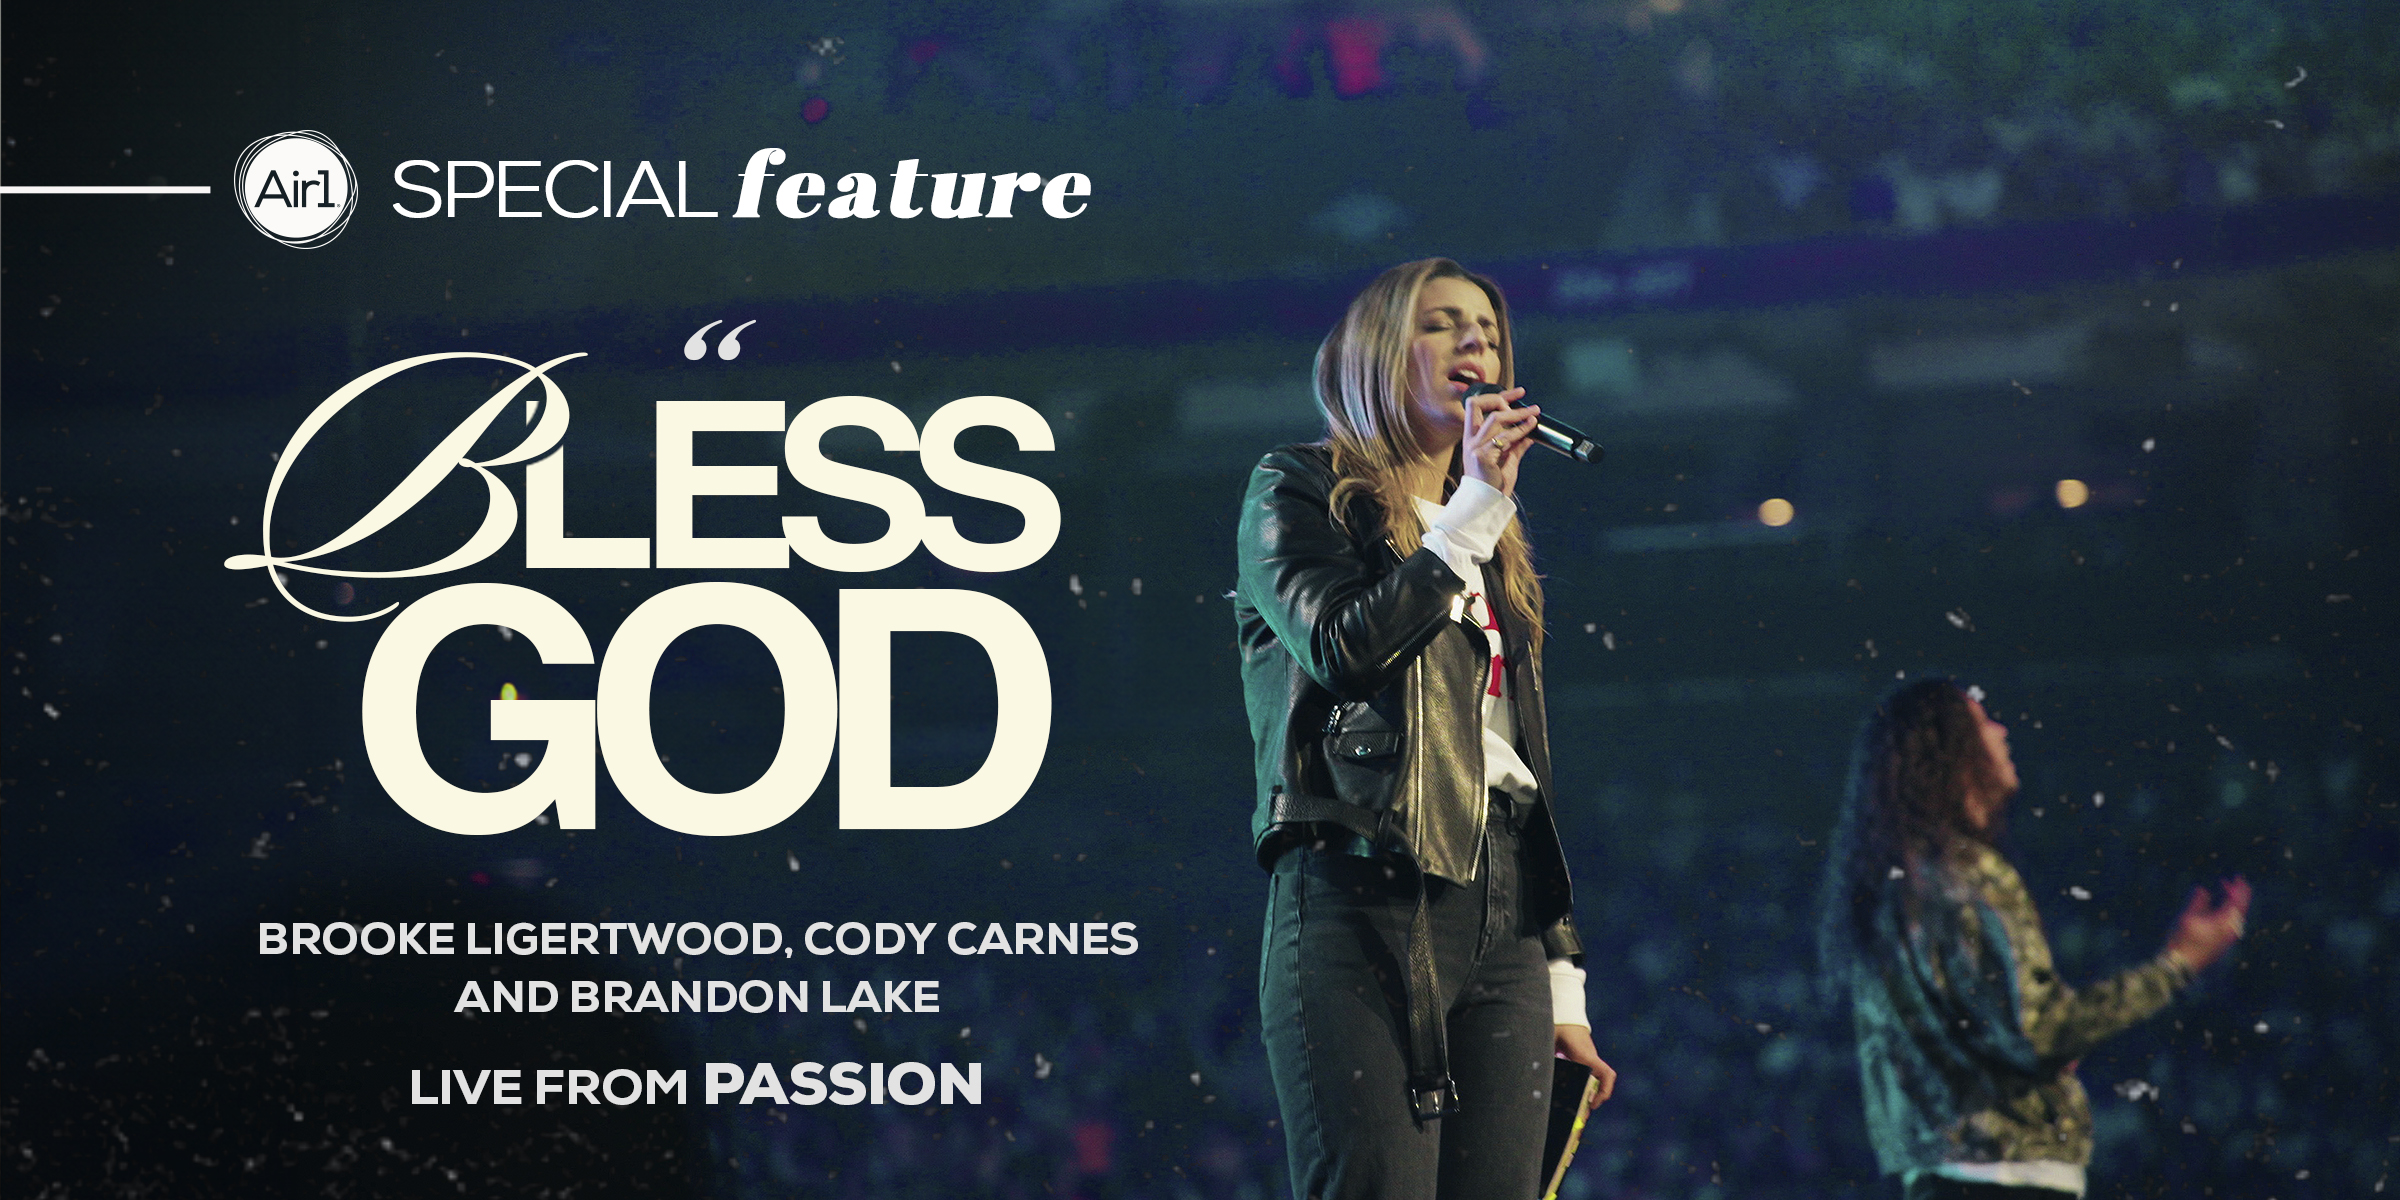 Air1 Special Feature: "Bless God" Brooke Ligertwood, Cody Carnes & Brandon Lake